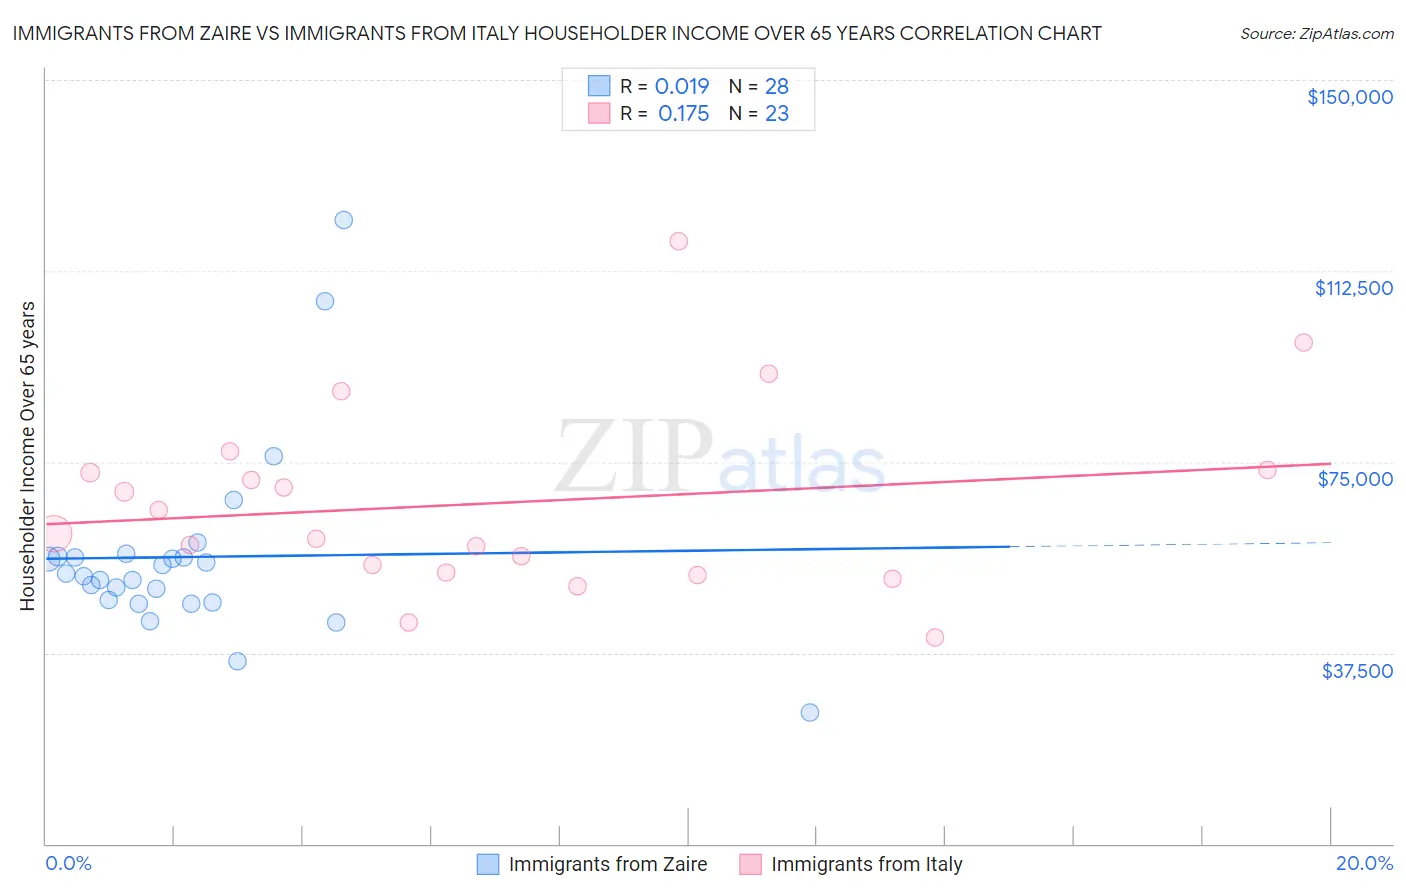 Immigrants from Zaire vs Immigrants from Italy Householder Income Over 65 years